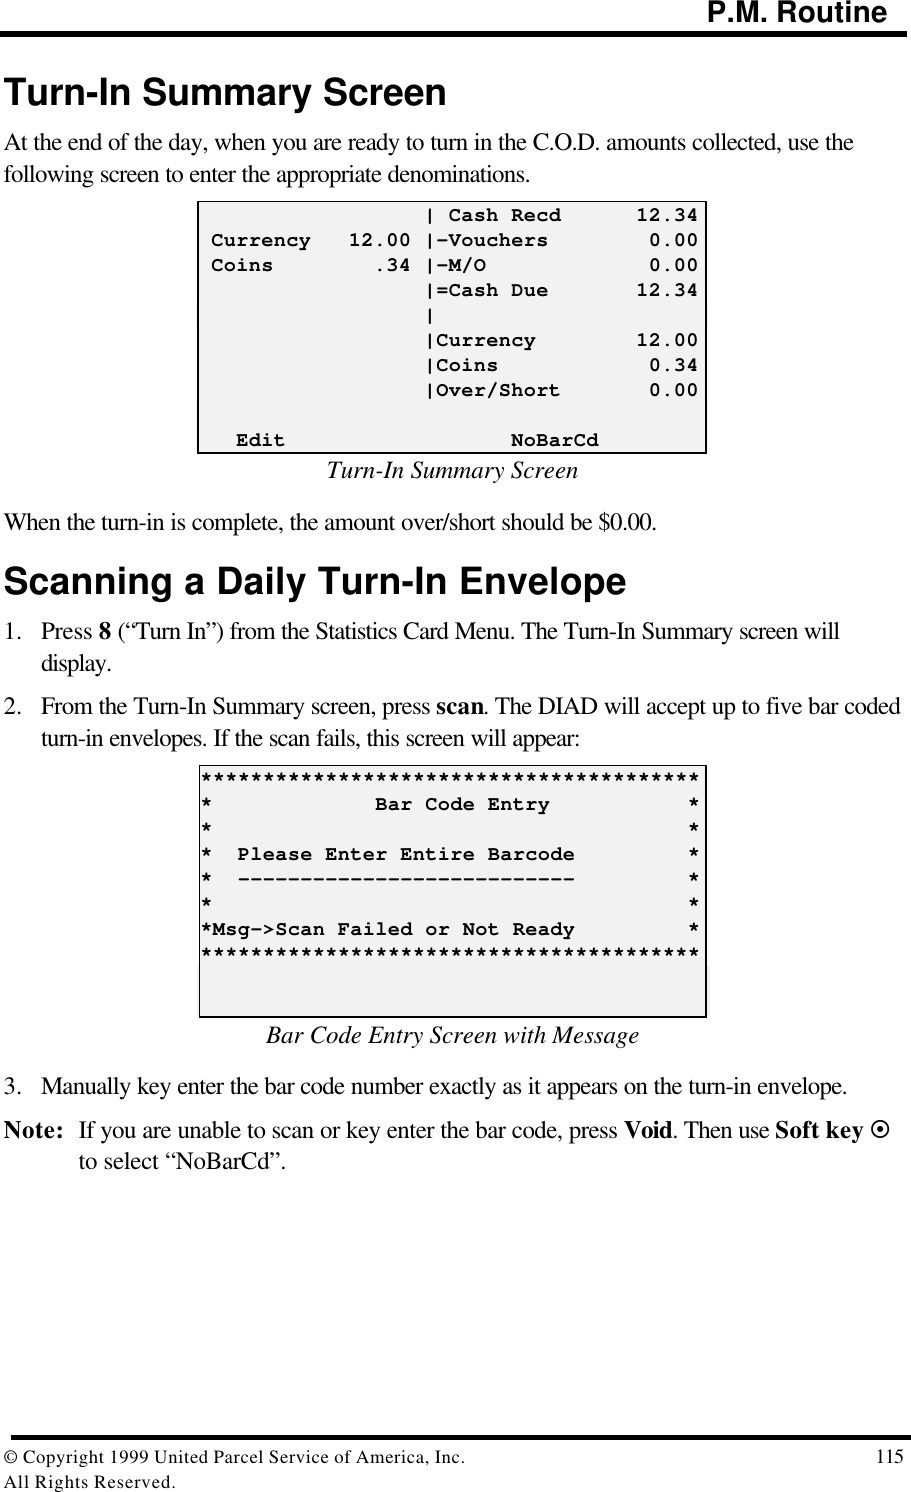                                                                                           P.M. Routine© Copyright 1999 United Parcel Service of America, Inc.  115All Rights Reserved.Turn-In Summary ScreenAt the end of the day, when you are ready to turn in the C.O.D. amounts collected, use thefollowing screen to enter the appropriate denominations.                  | Cash Recd      12.34 Currency   12.00 |-Vouchers        0.00 Coins        .34 |-M/O             0.00                  |=Cash Due       12.34                  |                  |Currency        12.00                  |Coins            0.34                  |Over/Short       0.00   Edit                  NoBarCdTurn-In Summary ScreenWhen the turn-in is complete, the amount over/short should be $0.00.Scanning a Daily Turn-In Envelope1. Press 8 (“Turn In”) from the Statistics Card Menu. The Turn-In Summary screen willdisplay.2. From the Turn-In Summary screen, press scan. The DIAD will accept up to five bar codedturn-in envelopes. If the scan fails, this screen will appear:*****************************************             Bar Code Entry           **                                      **  Please Enter Entire Barcode         **  ---------------------------         **                                      **Msg-&gt;Scan Failed or Not Ready         *****************************************Bar Code Entry Screen with Message3. Manually key enter the bar code number exactly as it appears on the turn-in envelope.Note: If you are unable to scan or key enter the bar code, press Void. Then use Soft key ¤to select “NoBarCd”.